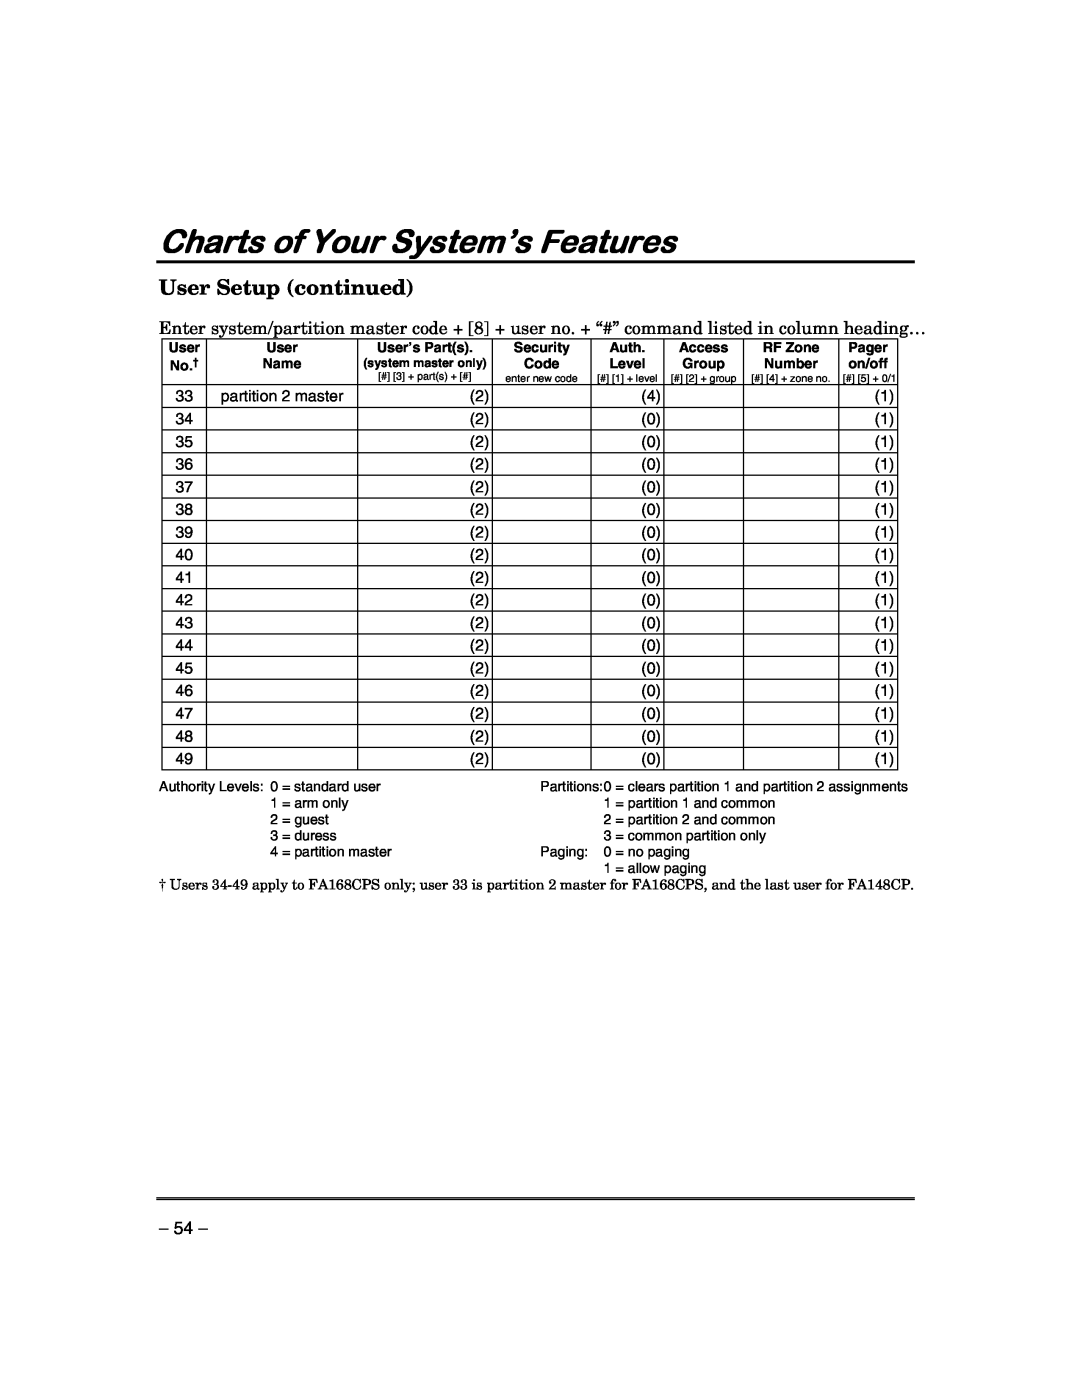 First Alert FA148CPSIA, FA168CPSSIA manual User Setup continued, Charts of Your System’s Features 